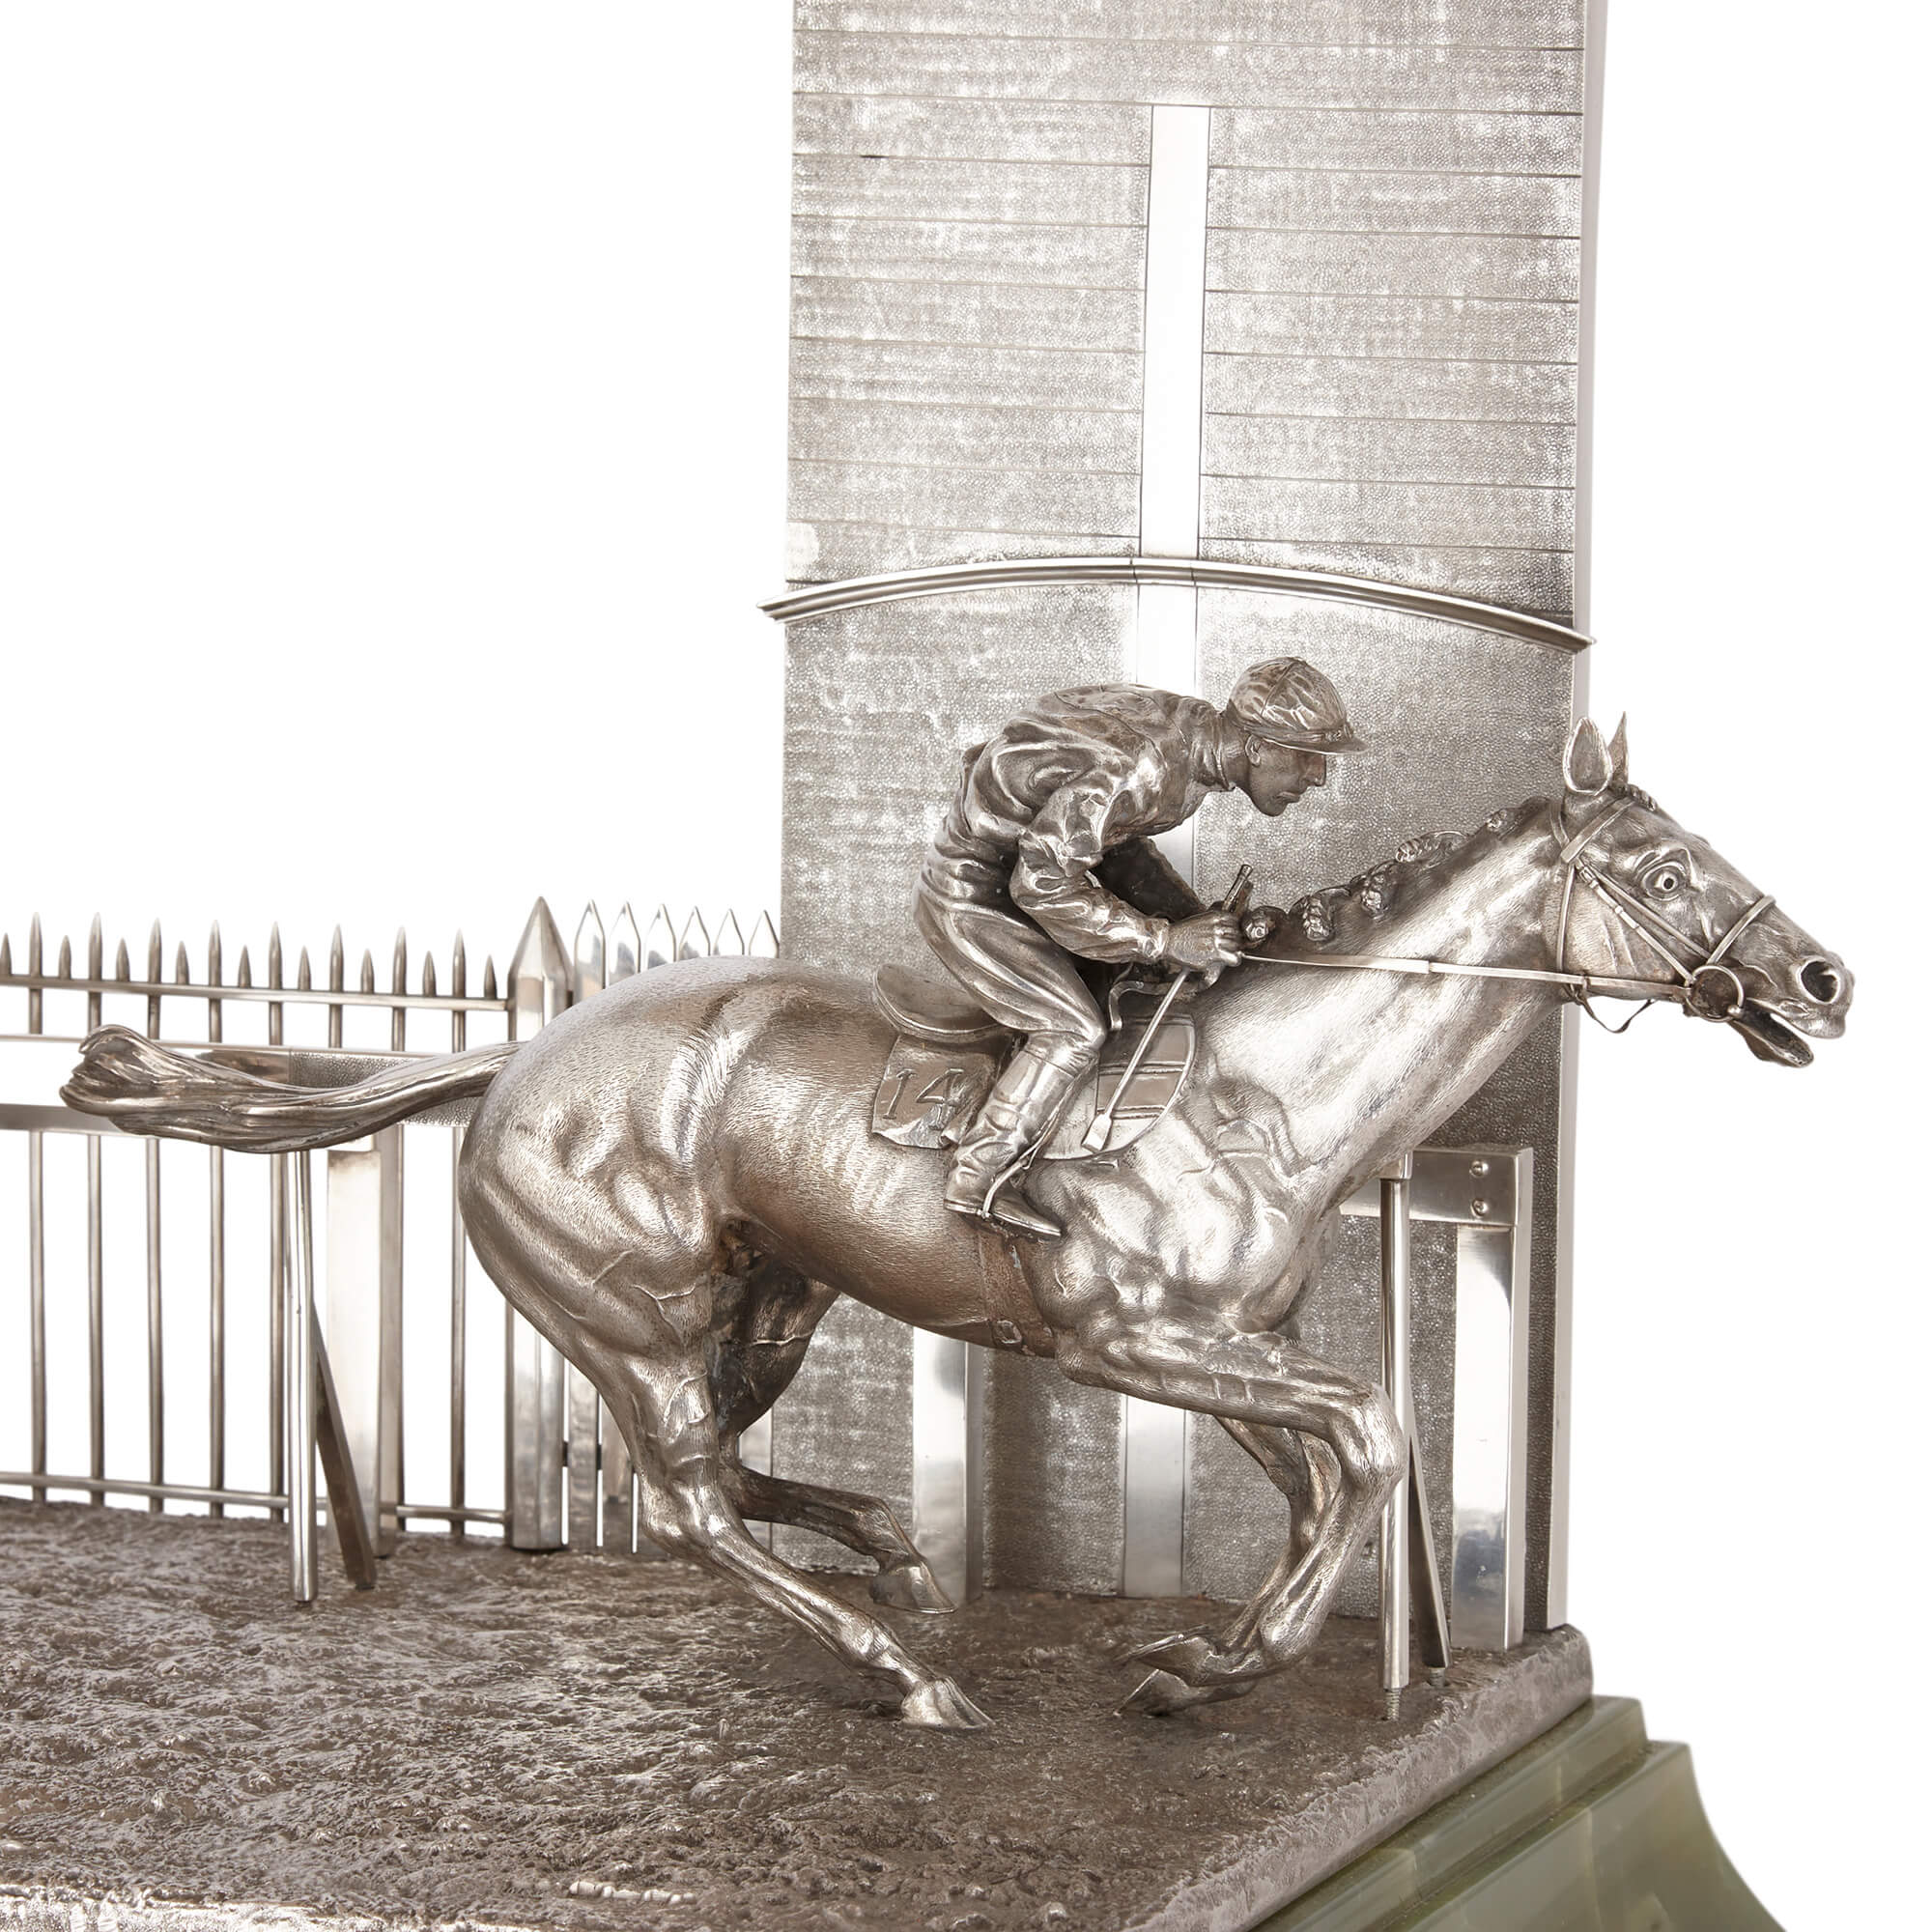 Silver and onyx horse racing sculpture for the Maharaja of Rajpipla